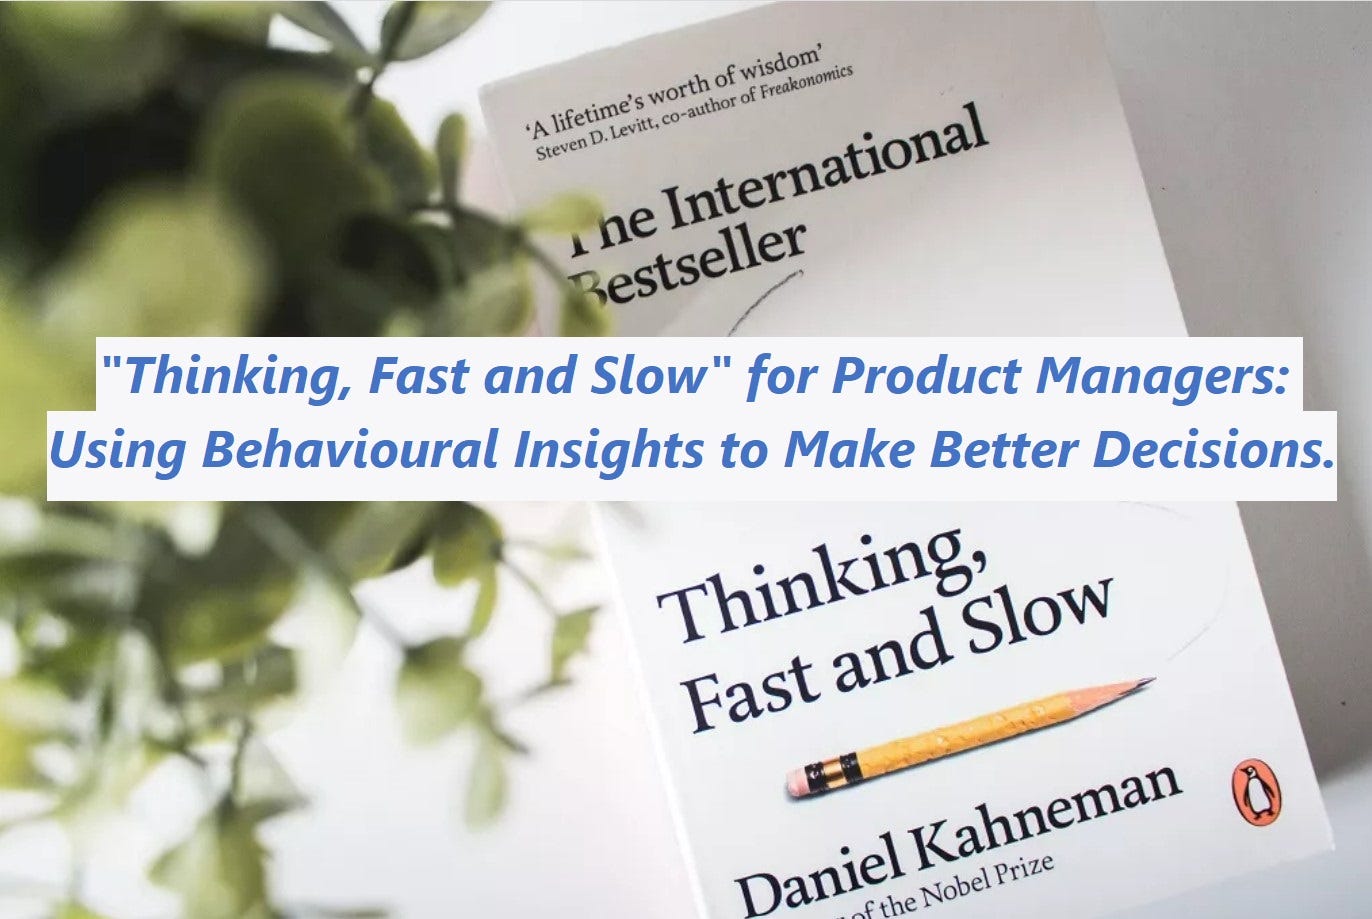 “Thinking, Fast and Slow” for Product Managers: Using Behavioural Insights to Make Better Decisions.